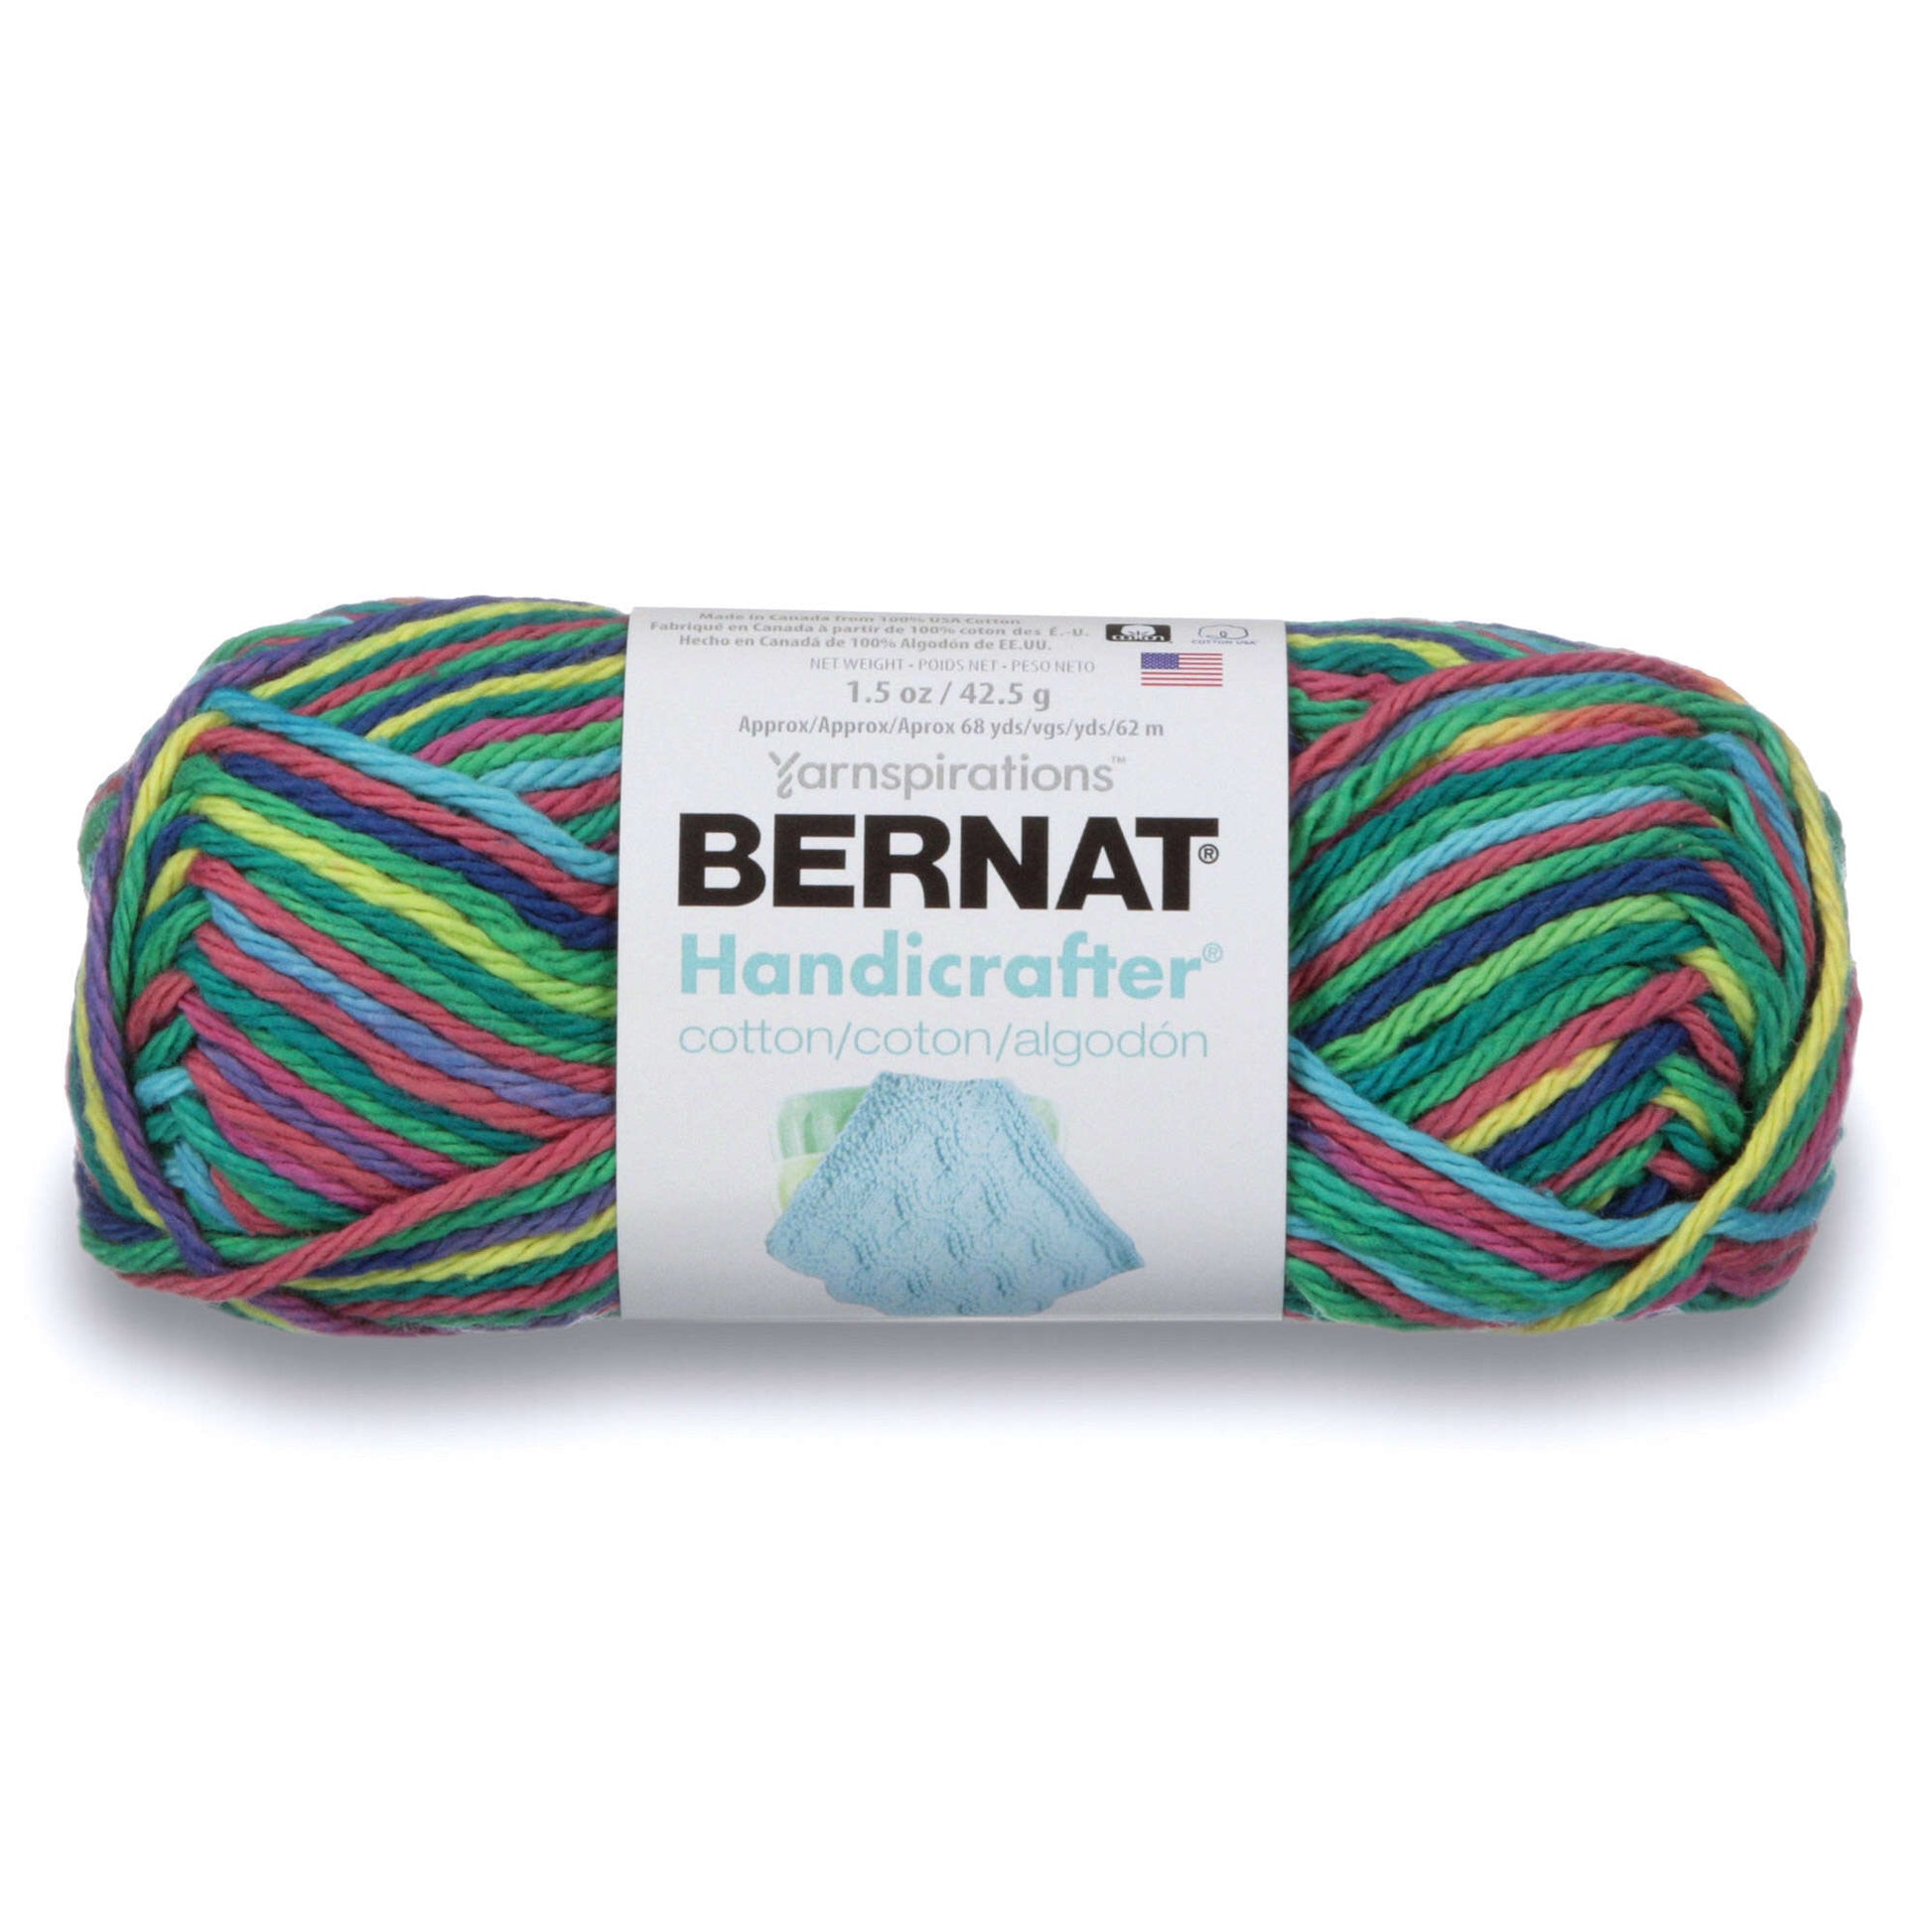 Bernat Handicrafter Cotton Ombres Yarn Psychedelic Ombre